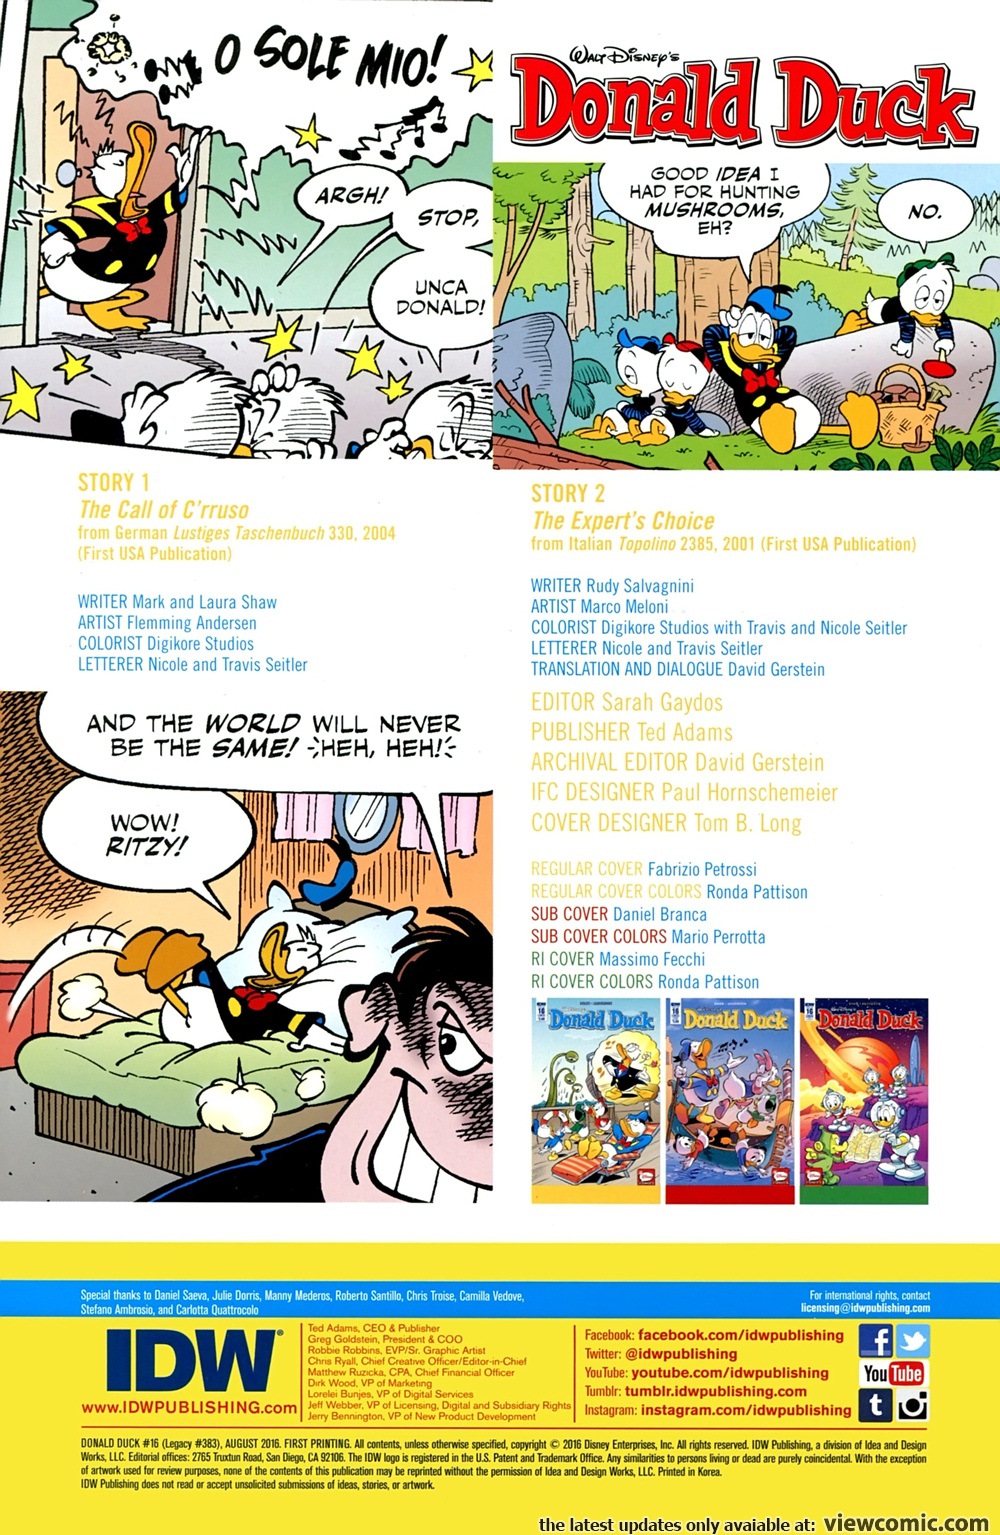 Donald Duck V2 016 2016 Read Donald Duck V2 016 2016 comic online in high quality